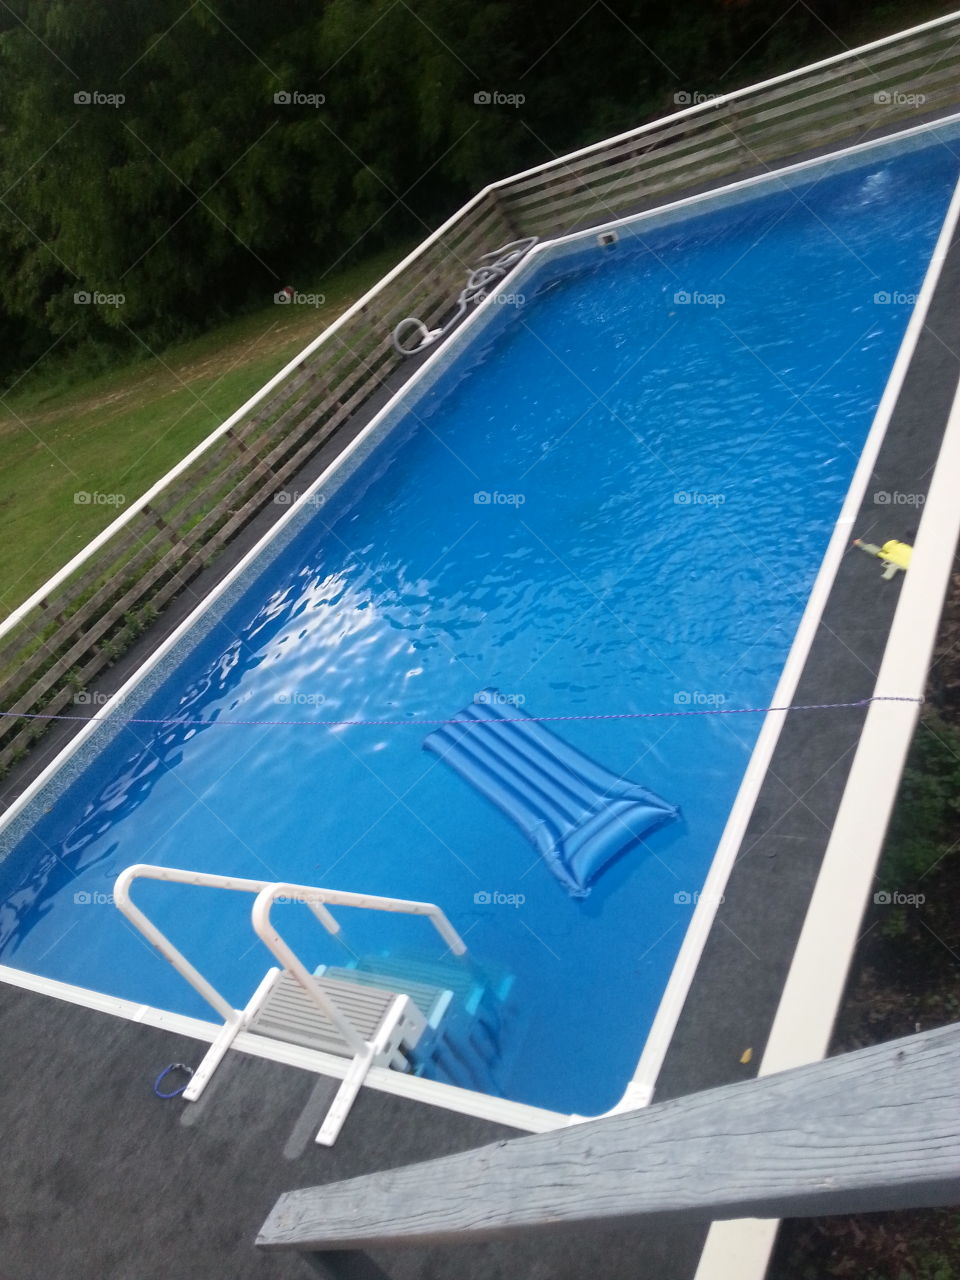 Beautiful Blue Pool. Our enhanced water in our pool is so neat.  :)